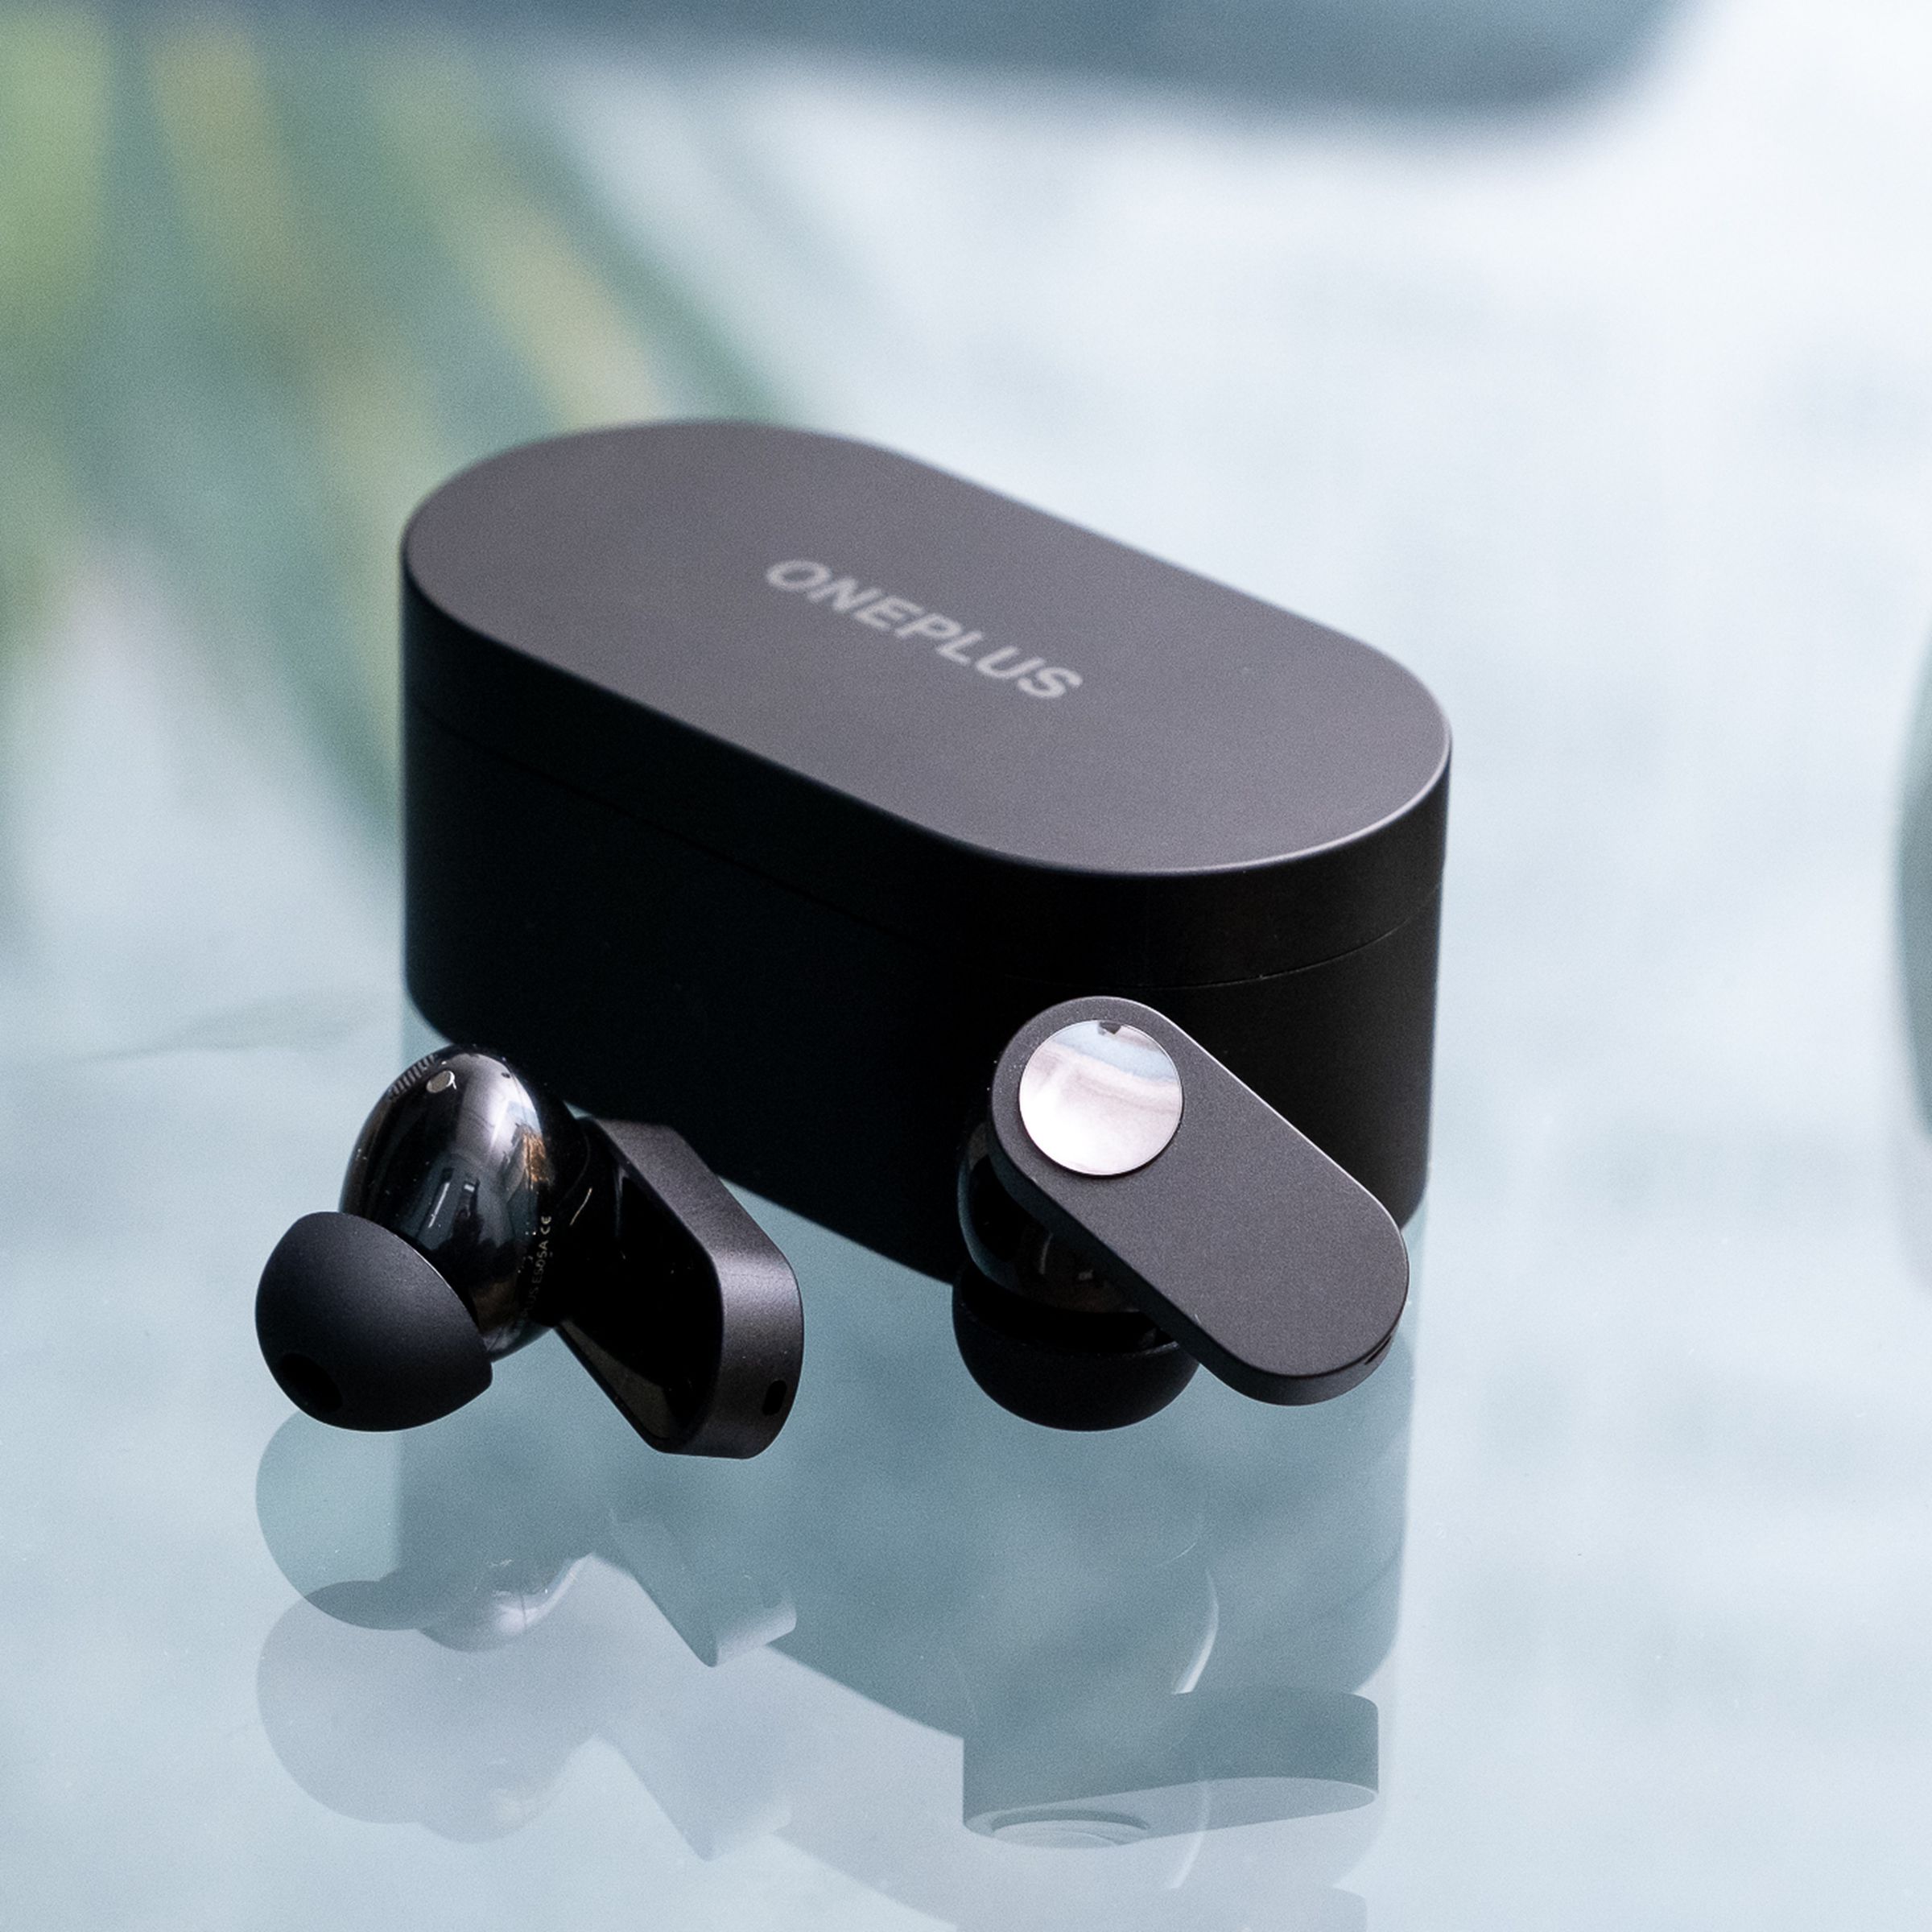 The new Nord Buds from OnePlus are a good budget set of wireless earbuds.